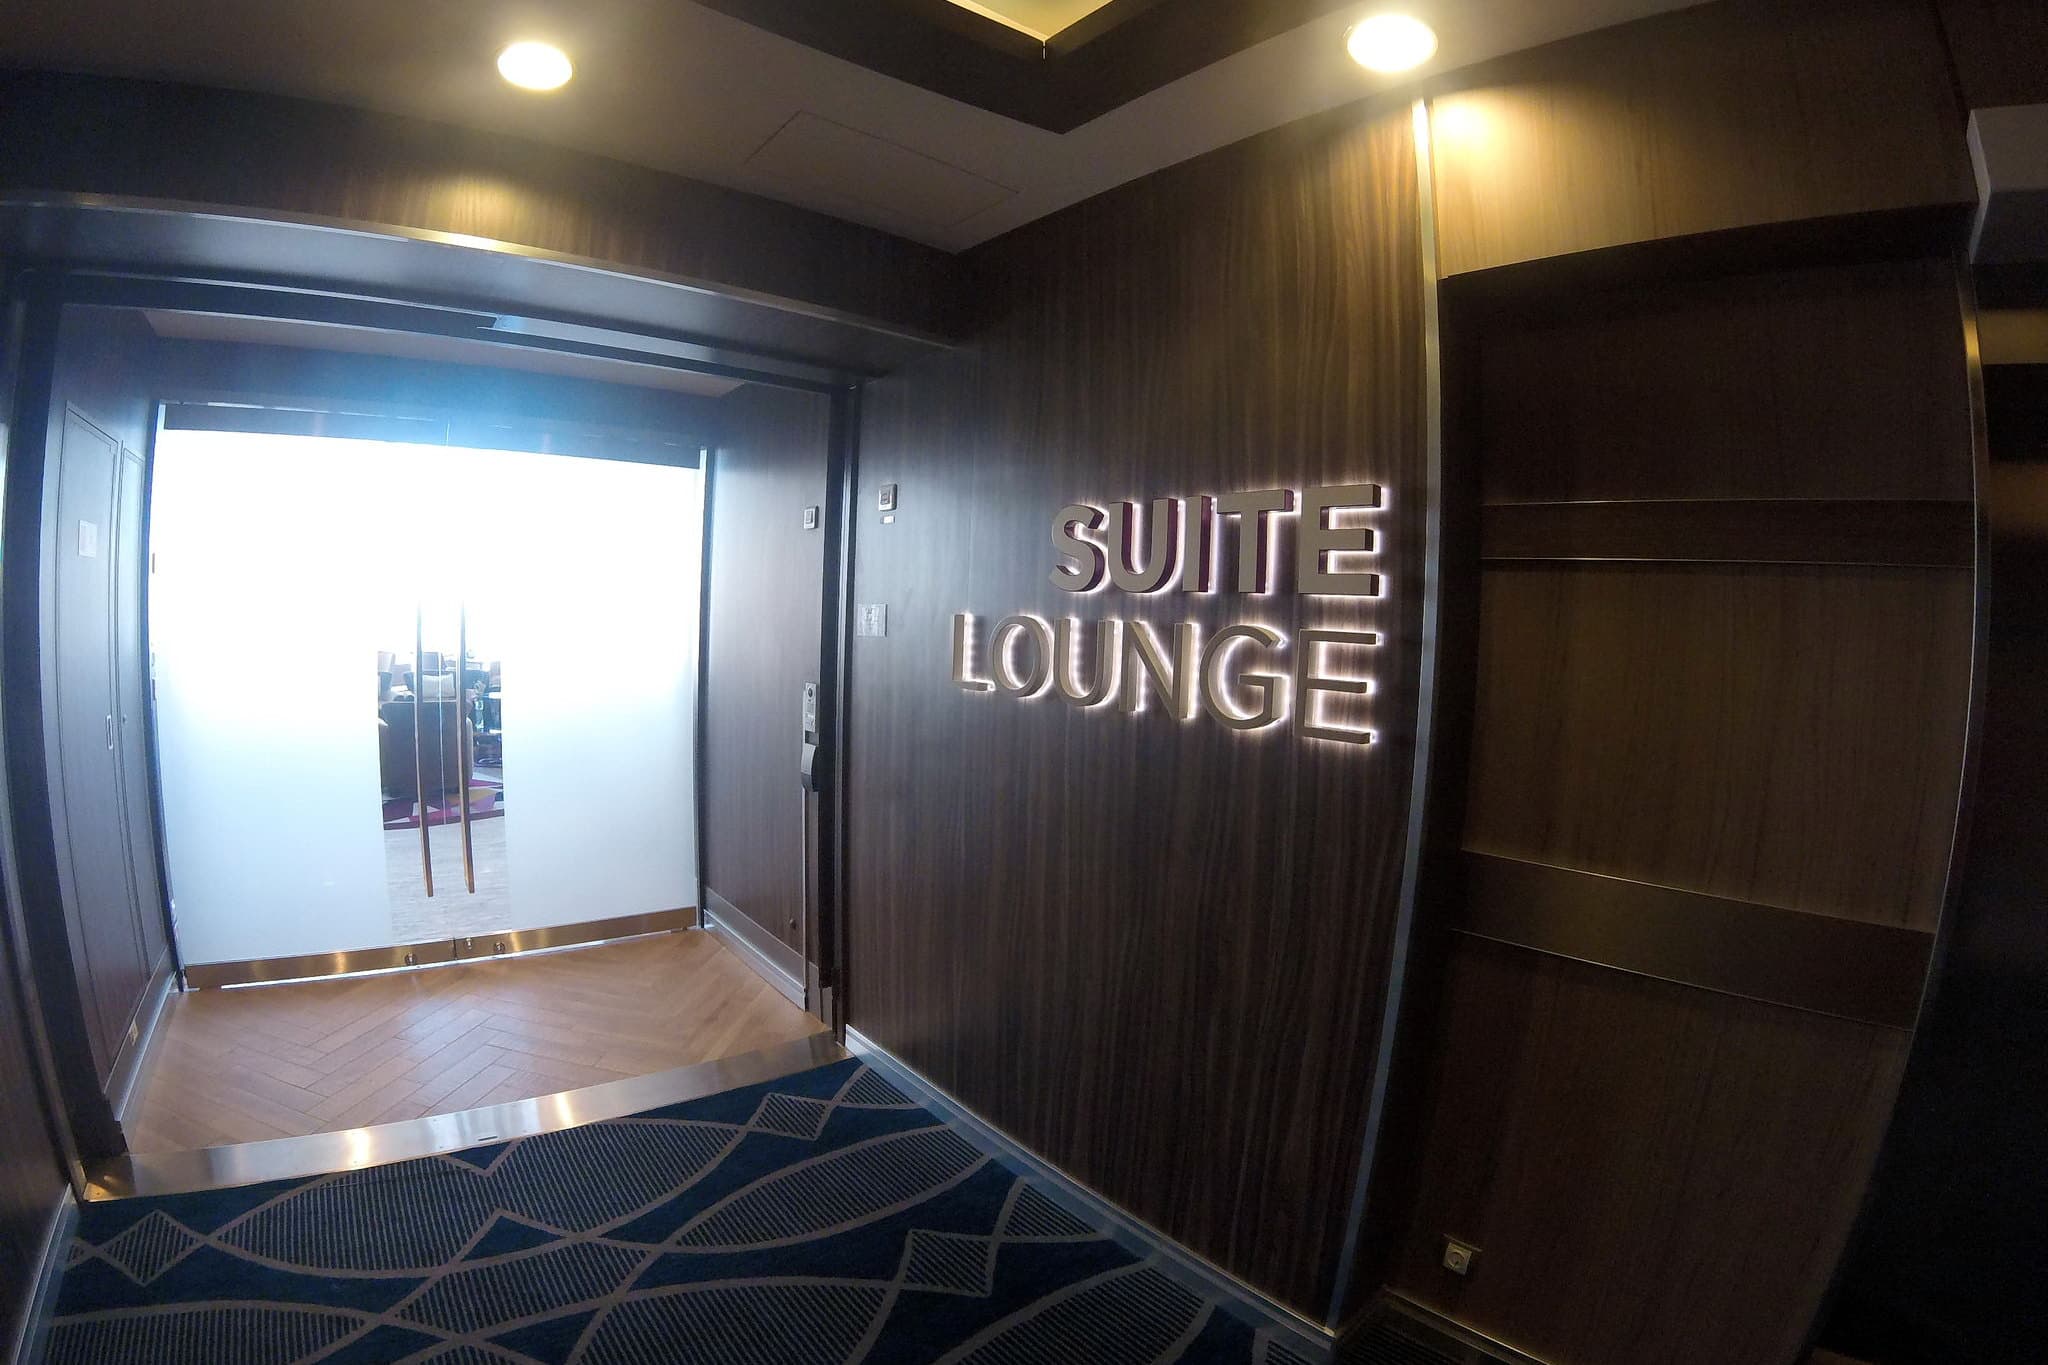 Harmony of the seas_Royal Family Suite_1722-24